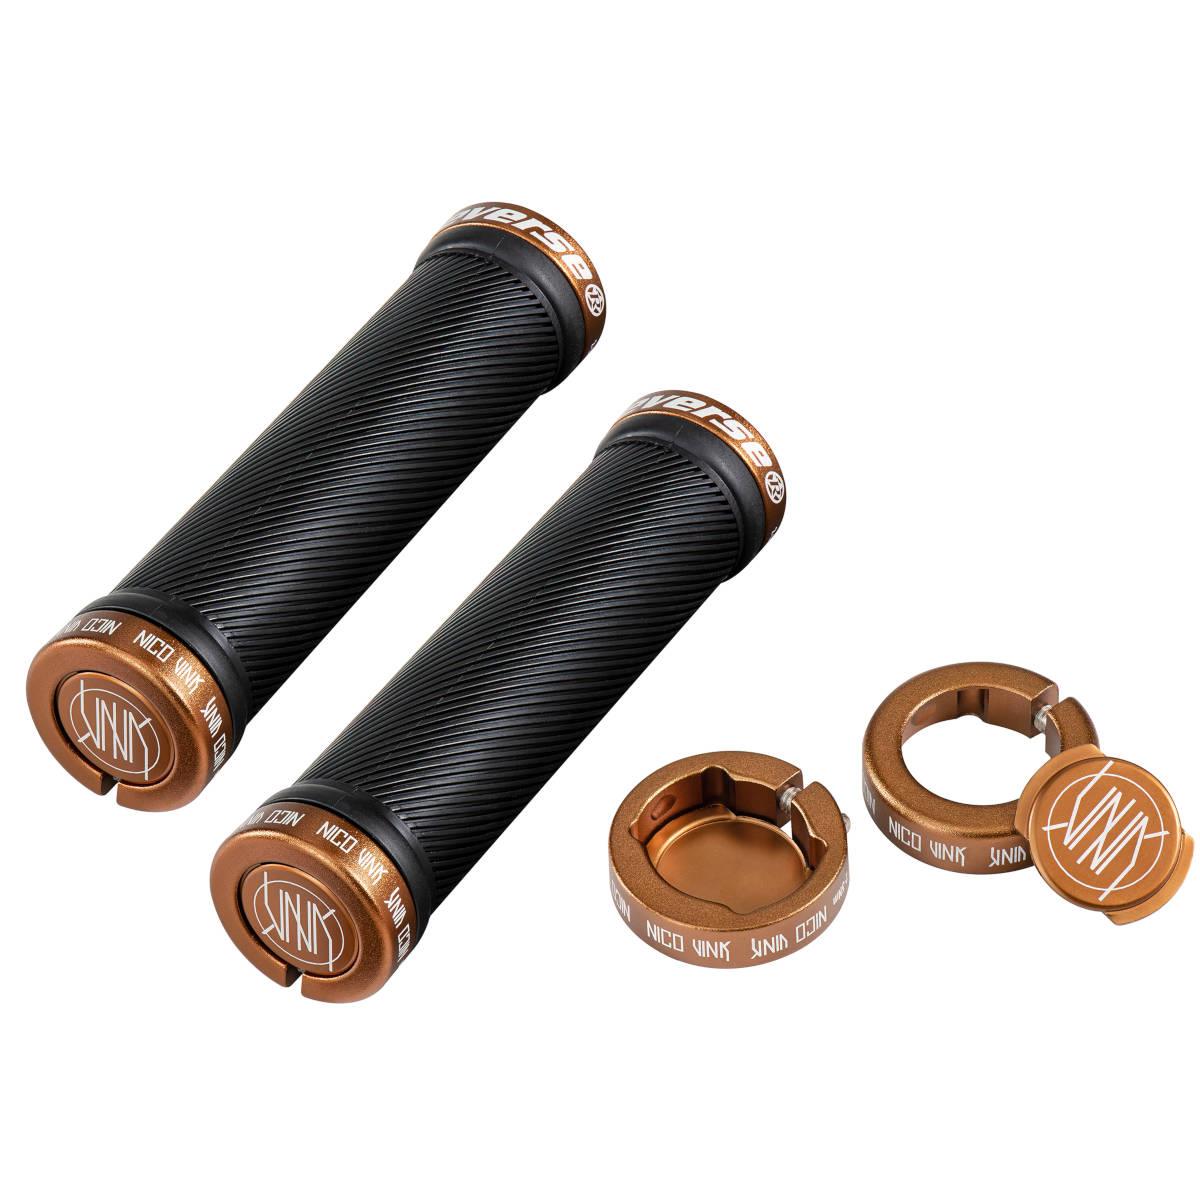 Reverse Components MTB Grips Nico Vink Signature Lock-On System, 30 x 130 mm, Black/Copper